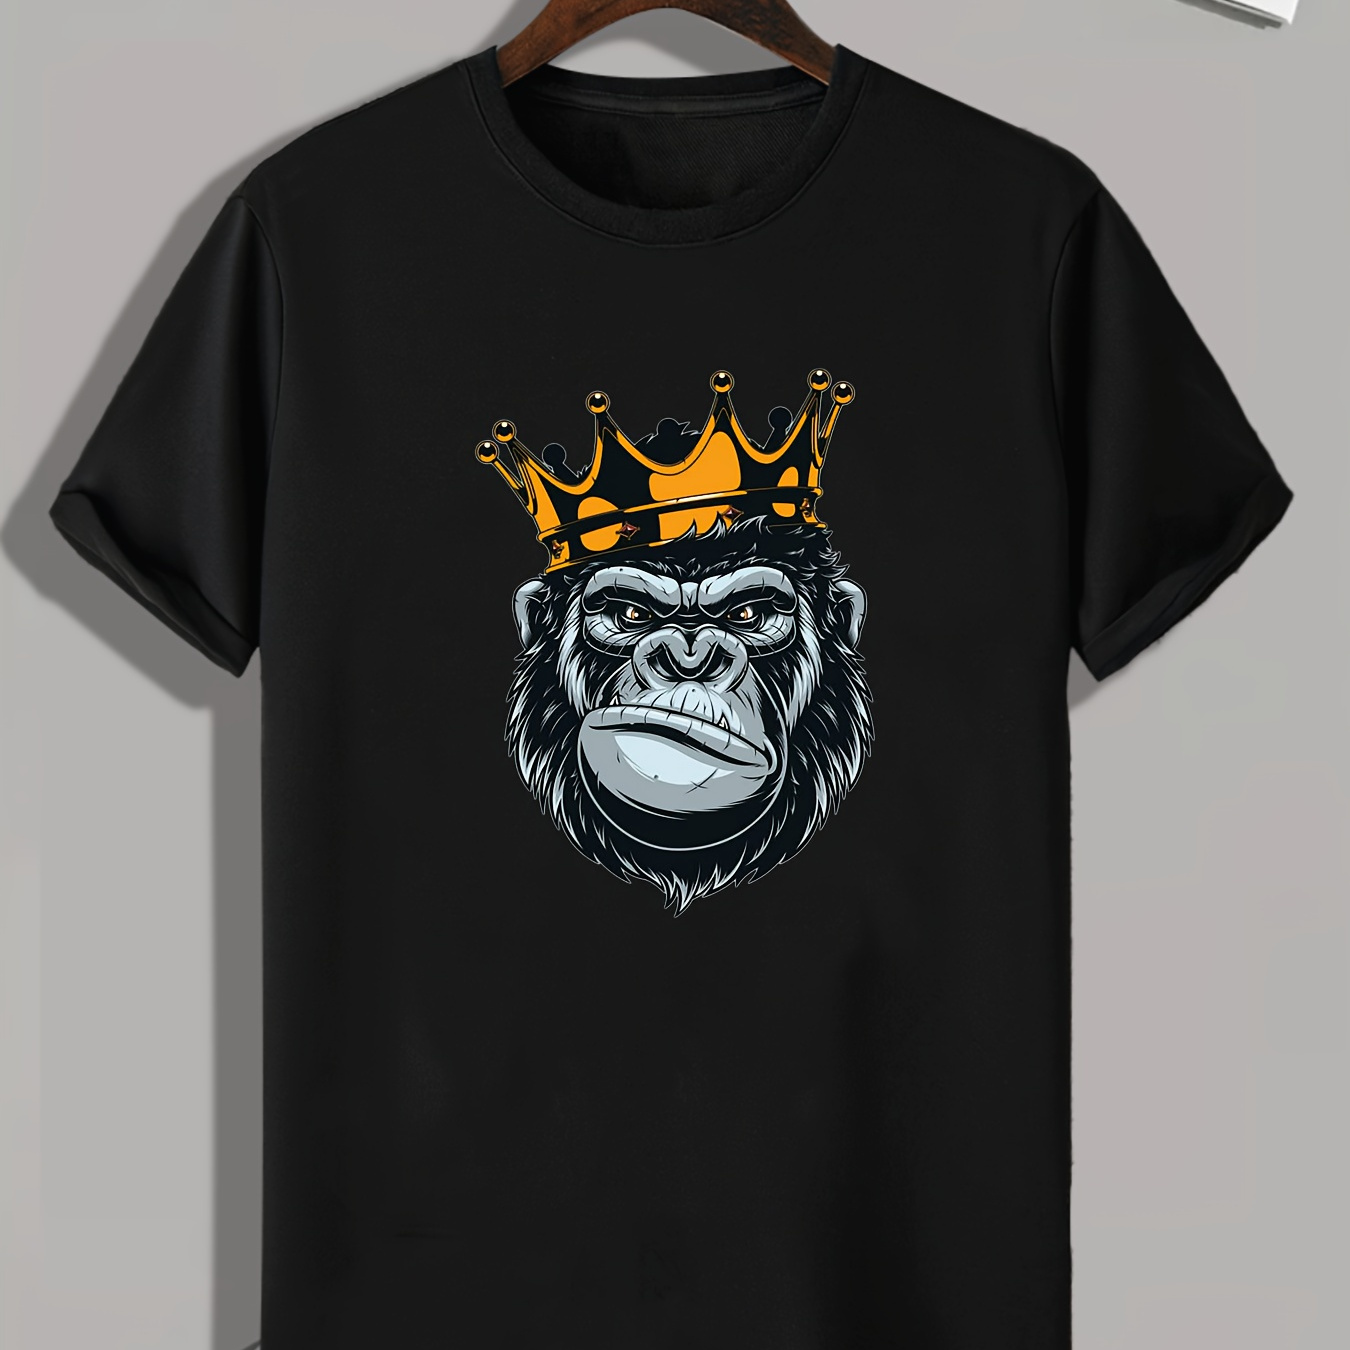 

Chimpanzee King Print, Men's Graphic T-shirt, Casual Comfy Tees For Summer, Mens Clothing